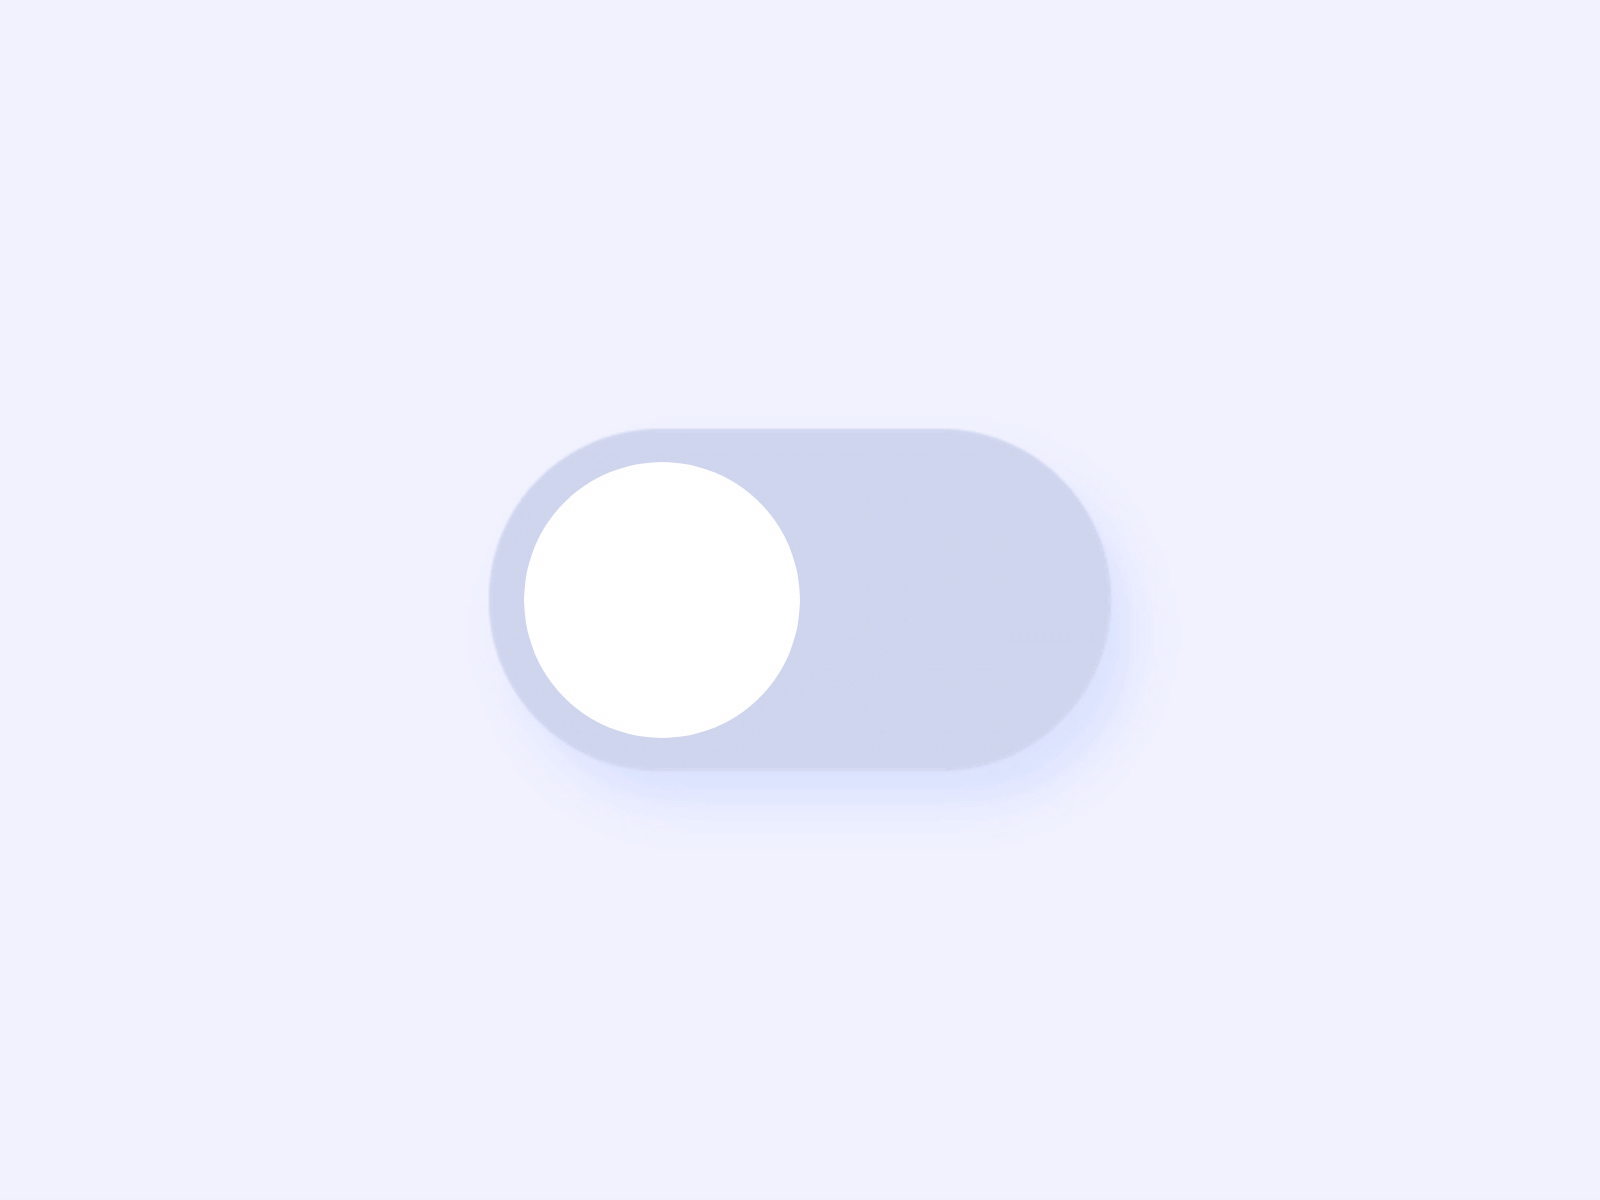 Animated Switch/Toggle Button (Version 1) animated button animated switch animated toggle animation button ios switch lottie lottie button lottie switch lottie toggle switch switch button toggle toggle button ui